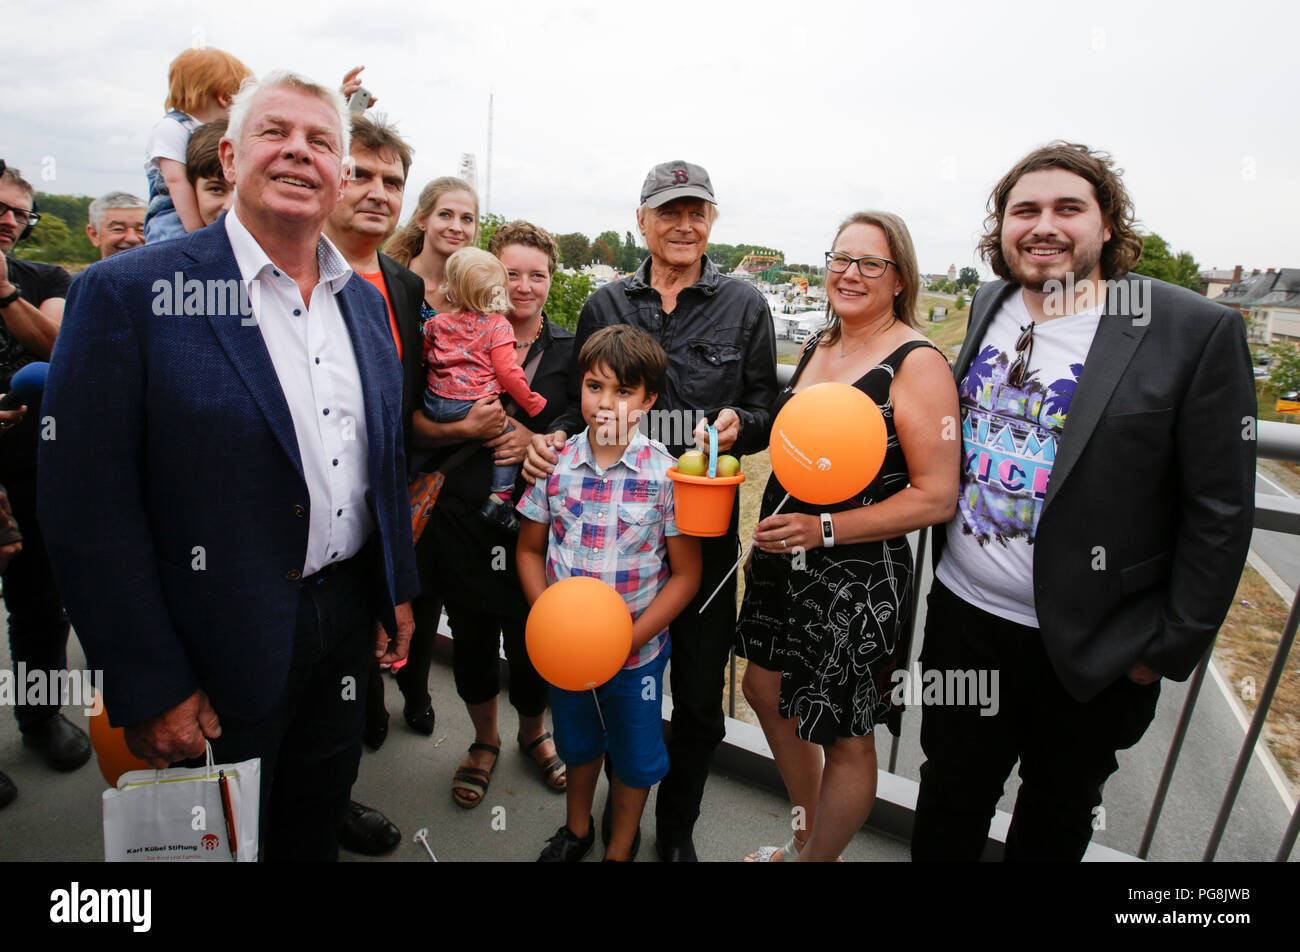 Worms, Germany. 24th August 2018. Actor Peter Englert (right), who initiated the renaming of the bridge to Terence-Hill-Bridge, Terence Hill (middle) and the Lord Mayor of Worms Michael Kissel (left) pose with members of the Karl-Kubel-Foundation for the press. Italian actor Terence Hill visited the German city of Worms, to present his new movie (My Name is somebody). Terence Hill added the stop in Worms to his movie promotion tour in Germany, to visit a pedestrian bridge, that is unofficially named Terence-Hill-Bridge (officially Karl-Kubel-Bridge). Stock Photo